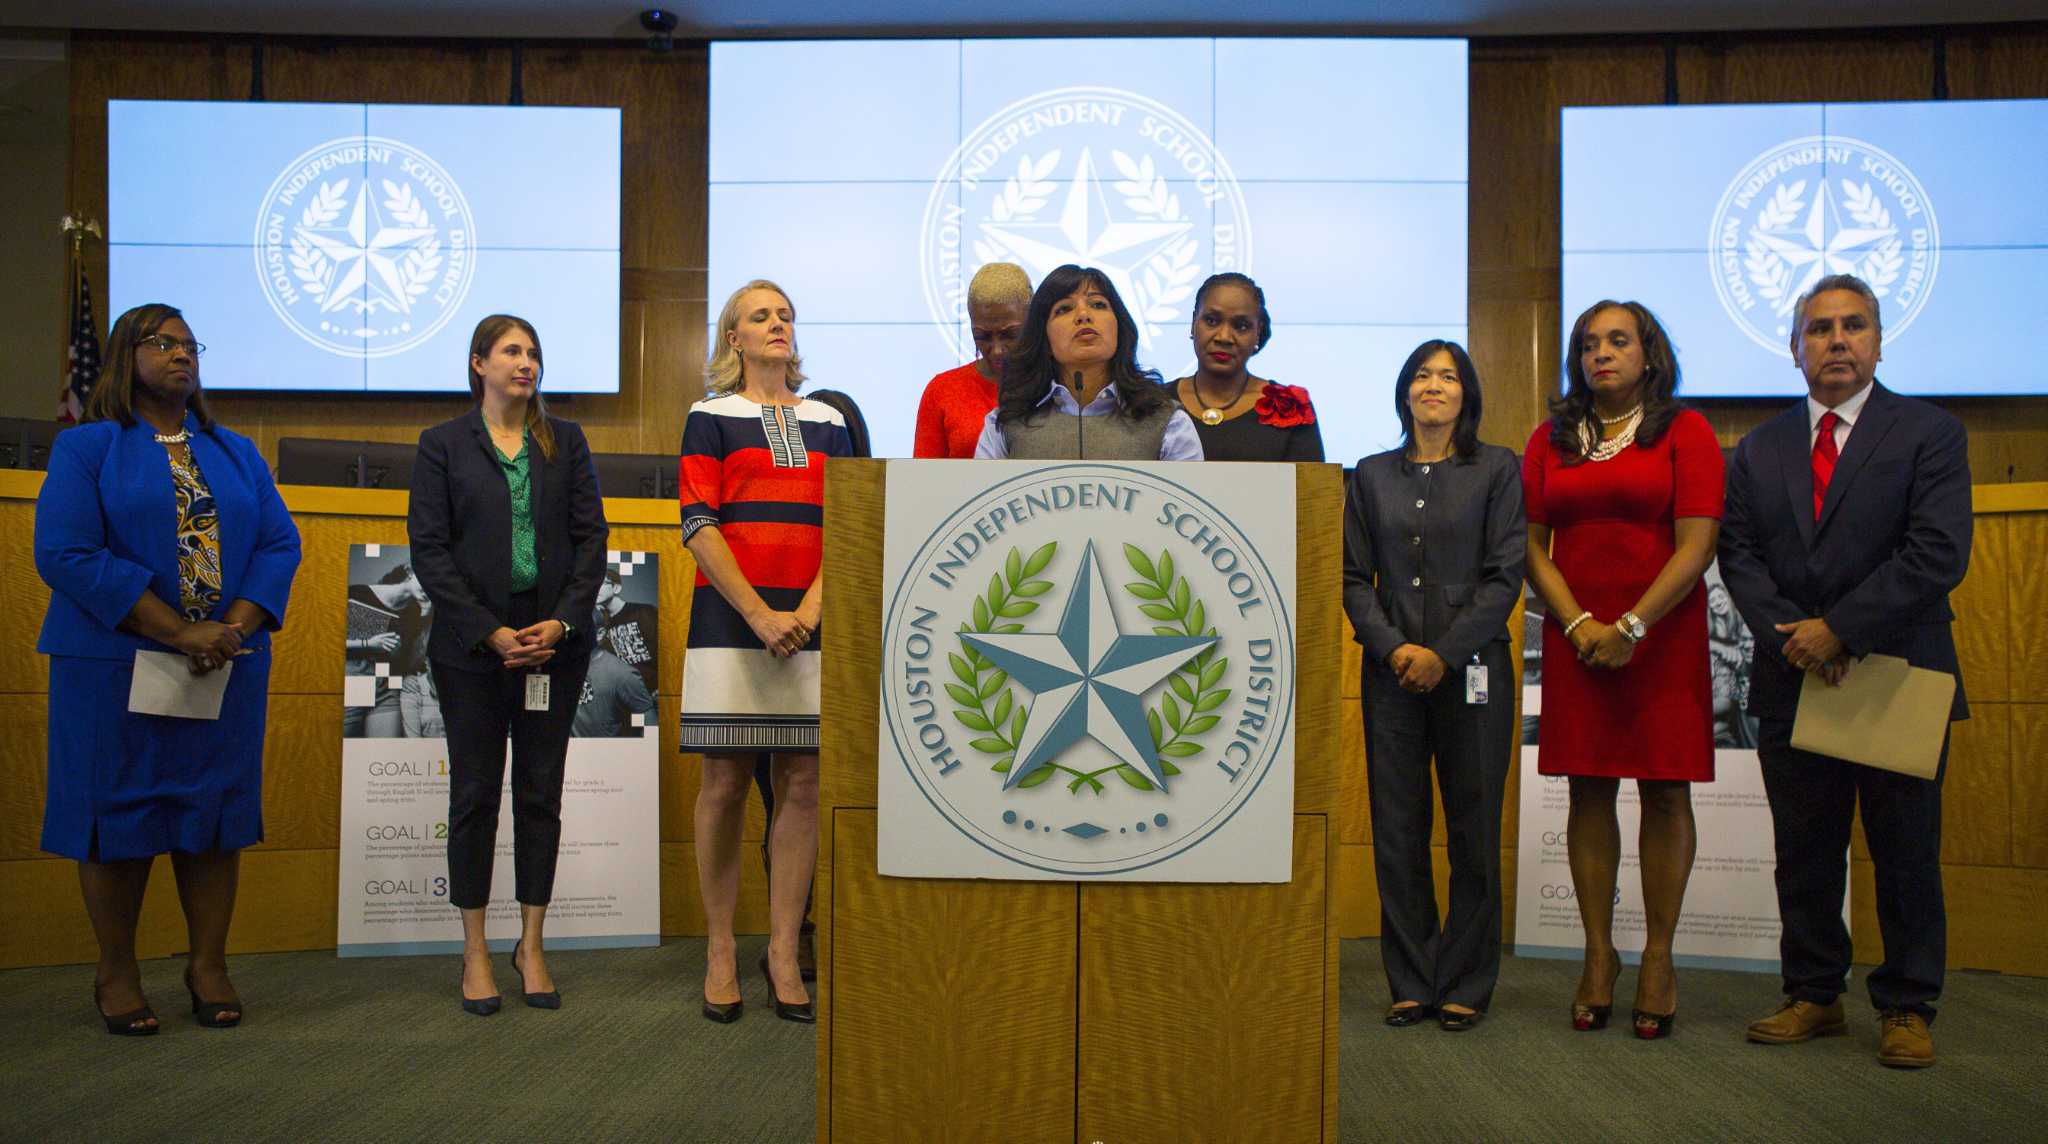 State conservator orders HISD to suspend superintendent search